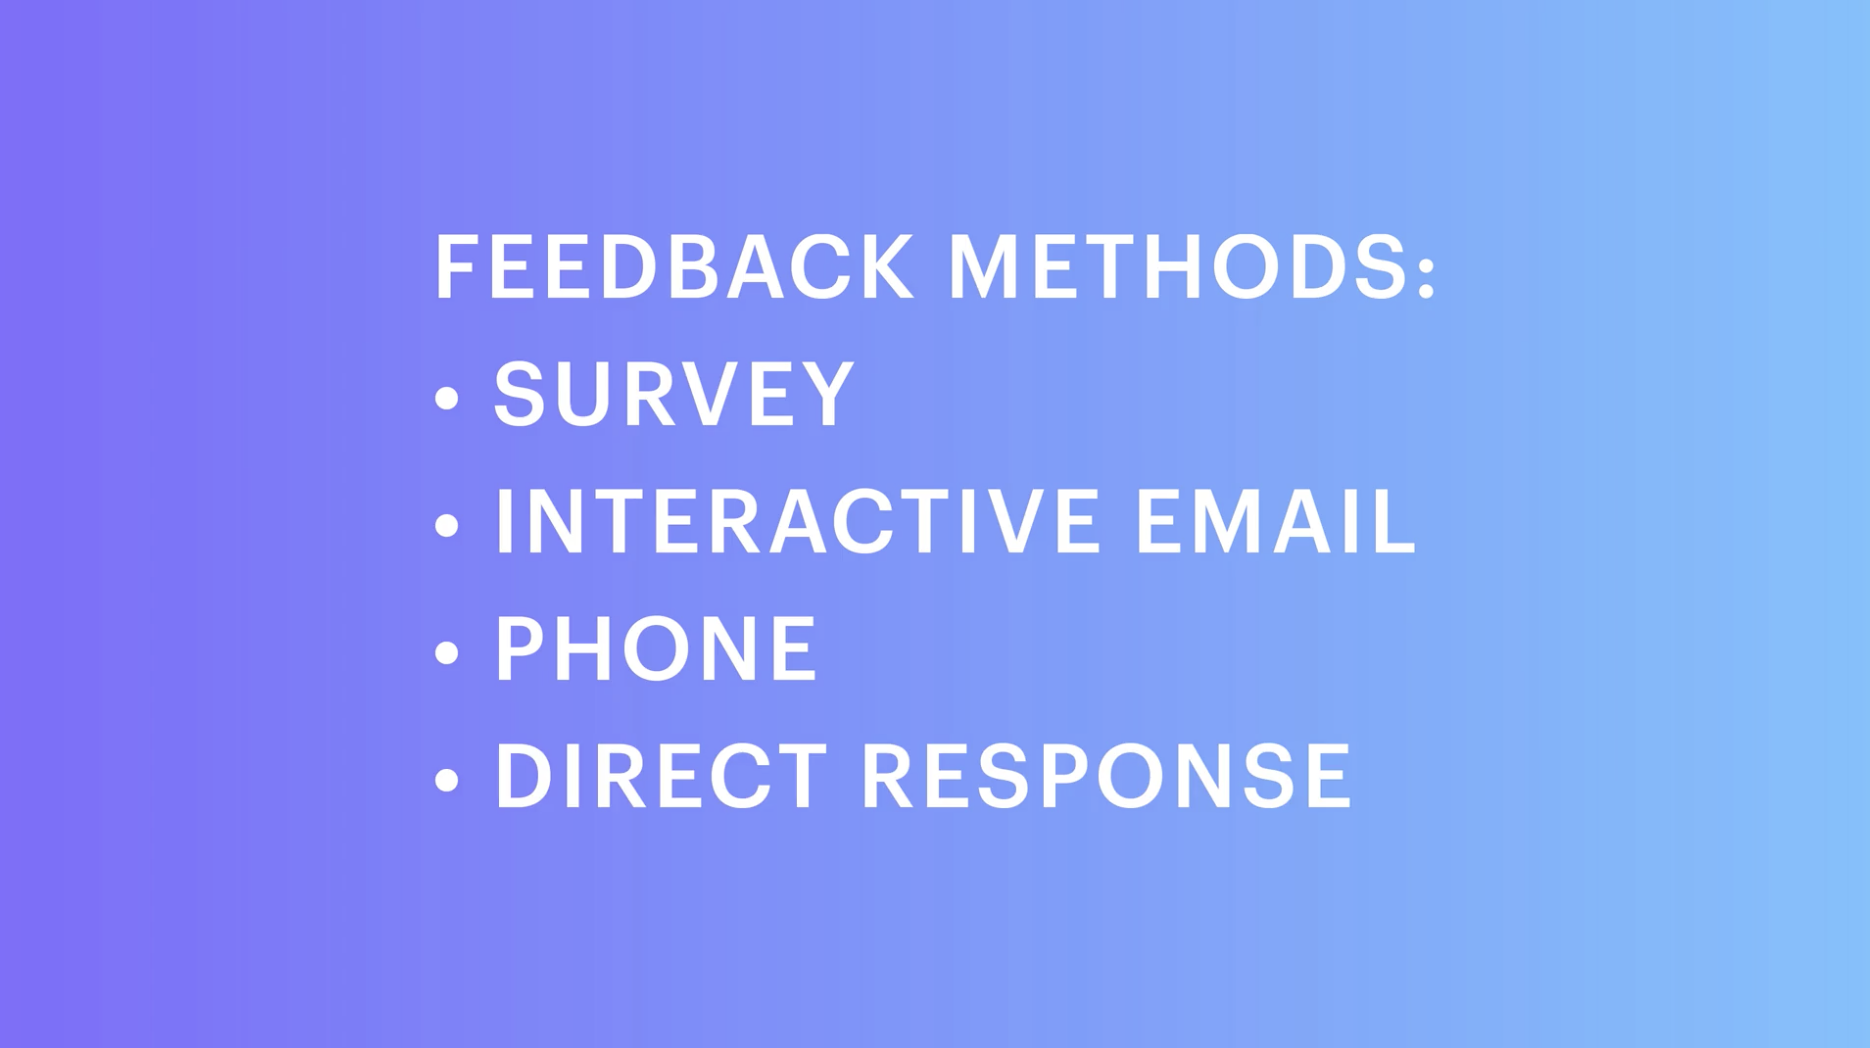 The graphic simply explains what the article is saying: You want to get customer feedback via email. You can ask for feedback through a customer satisfaction survey email, interactive email, phone, or direct response.